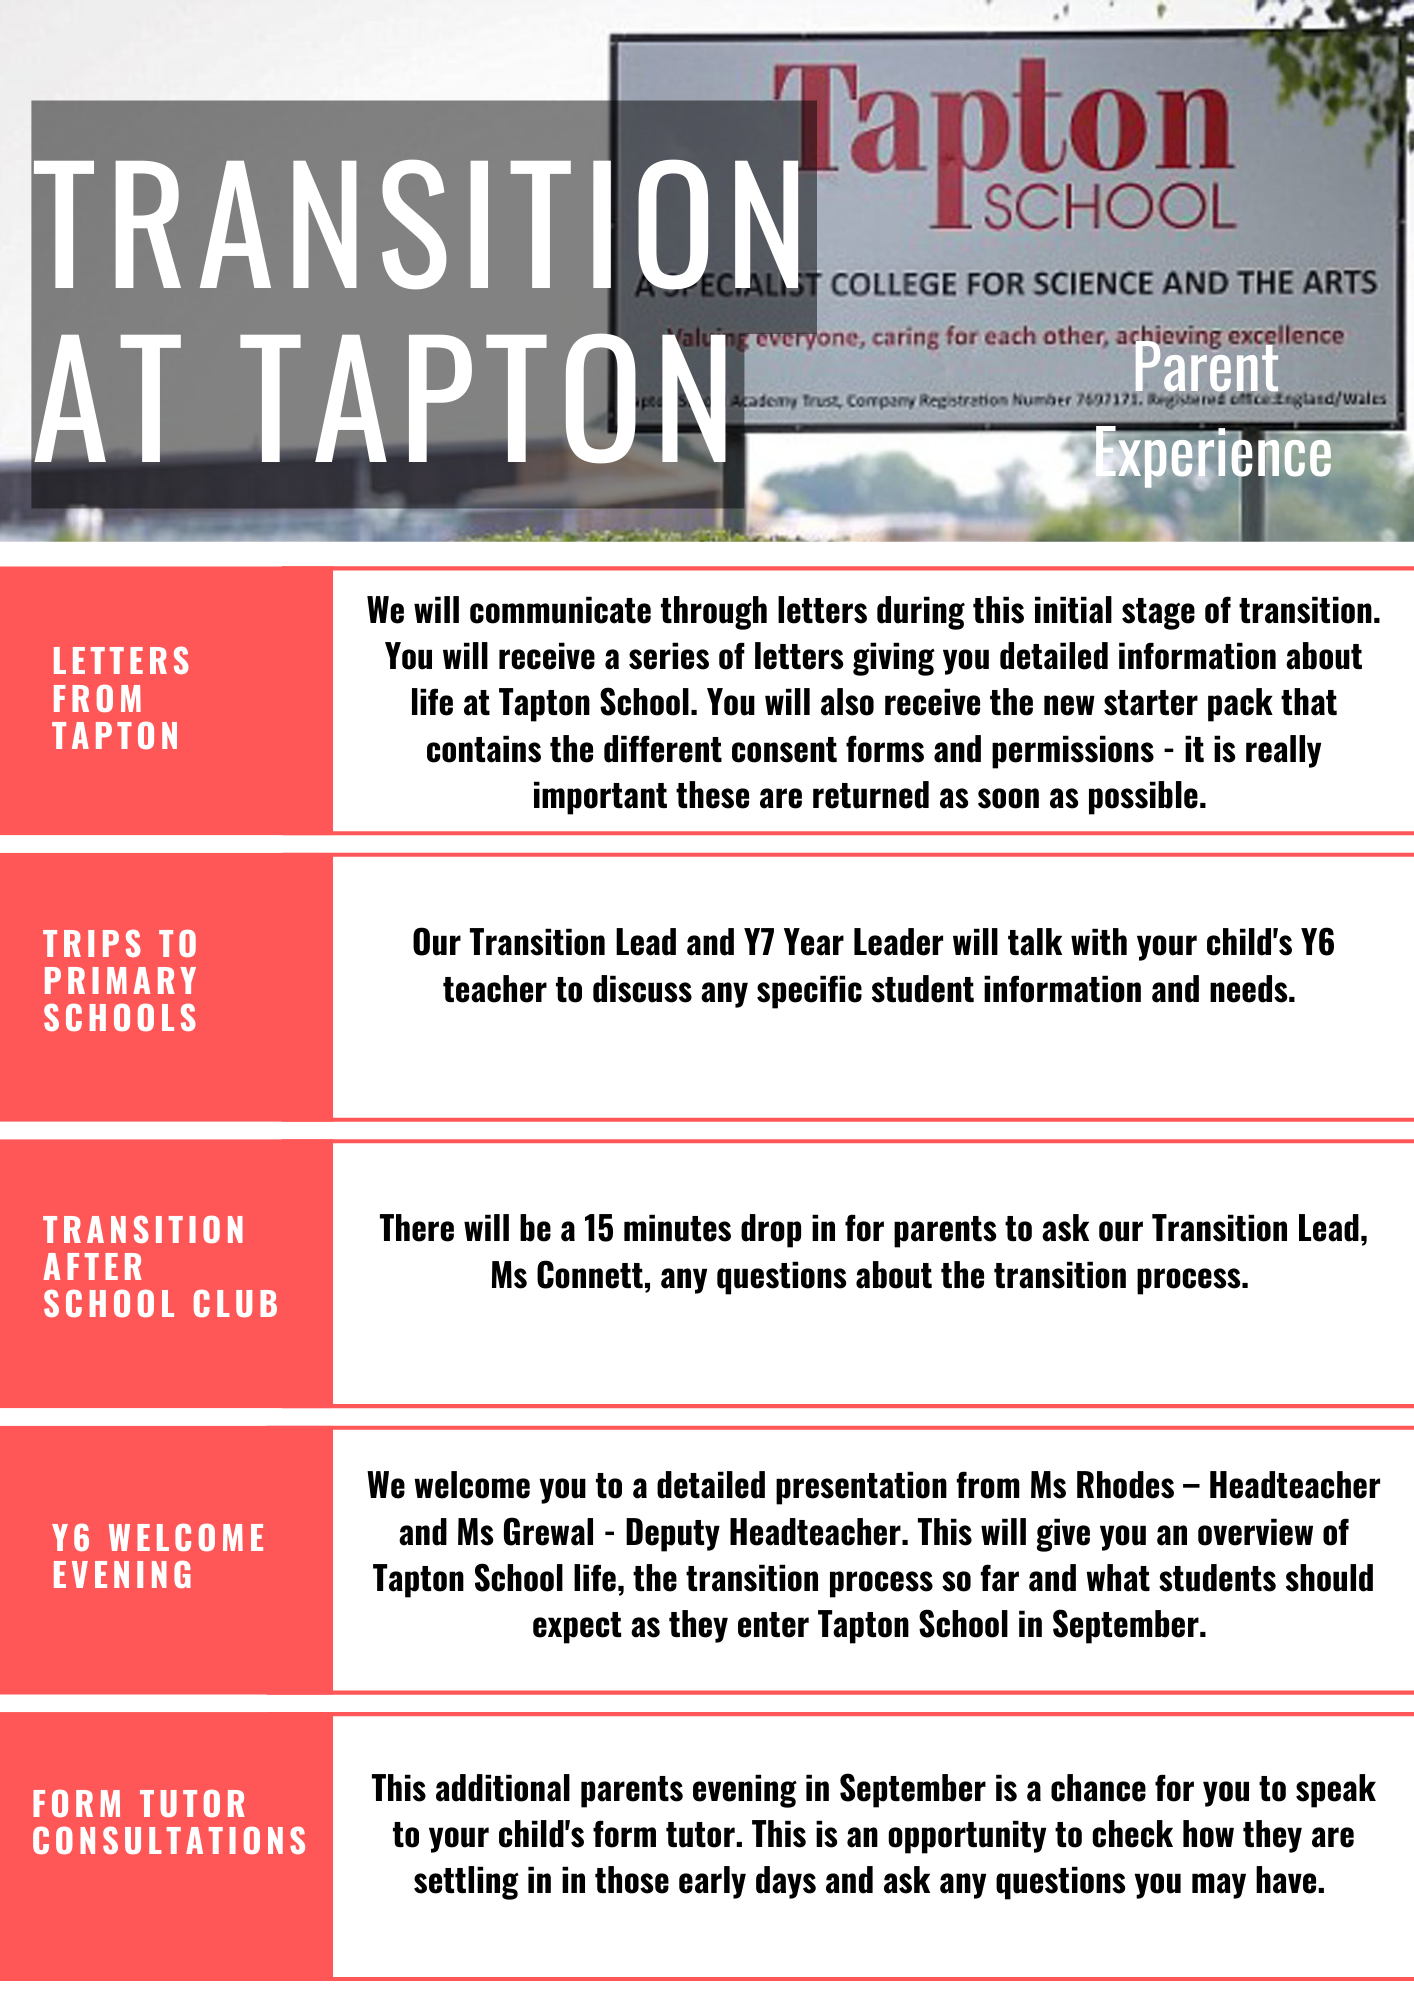 Transition at Tapton: Parent Experience